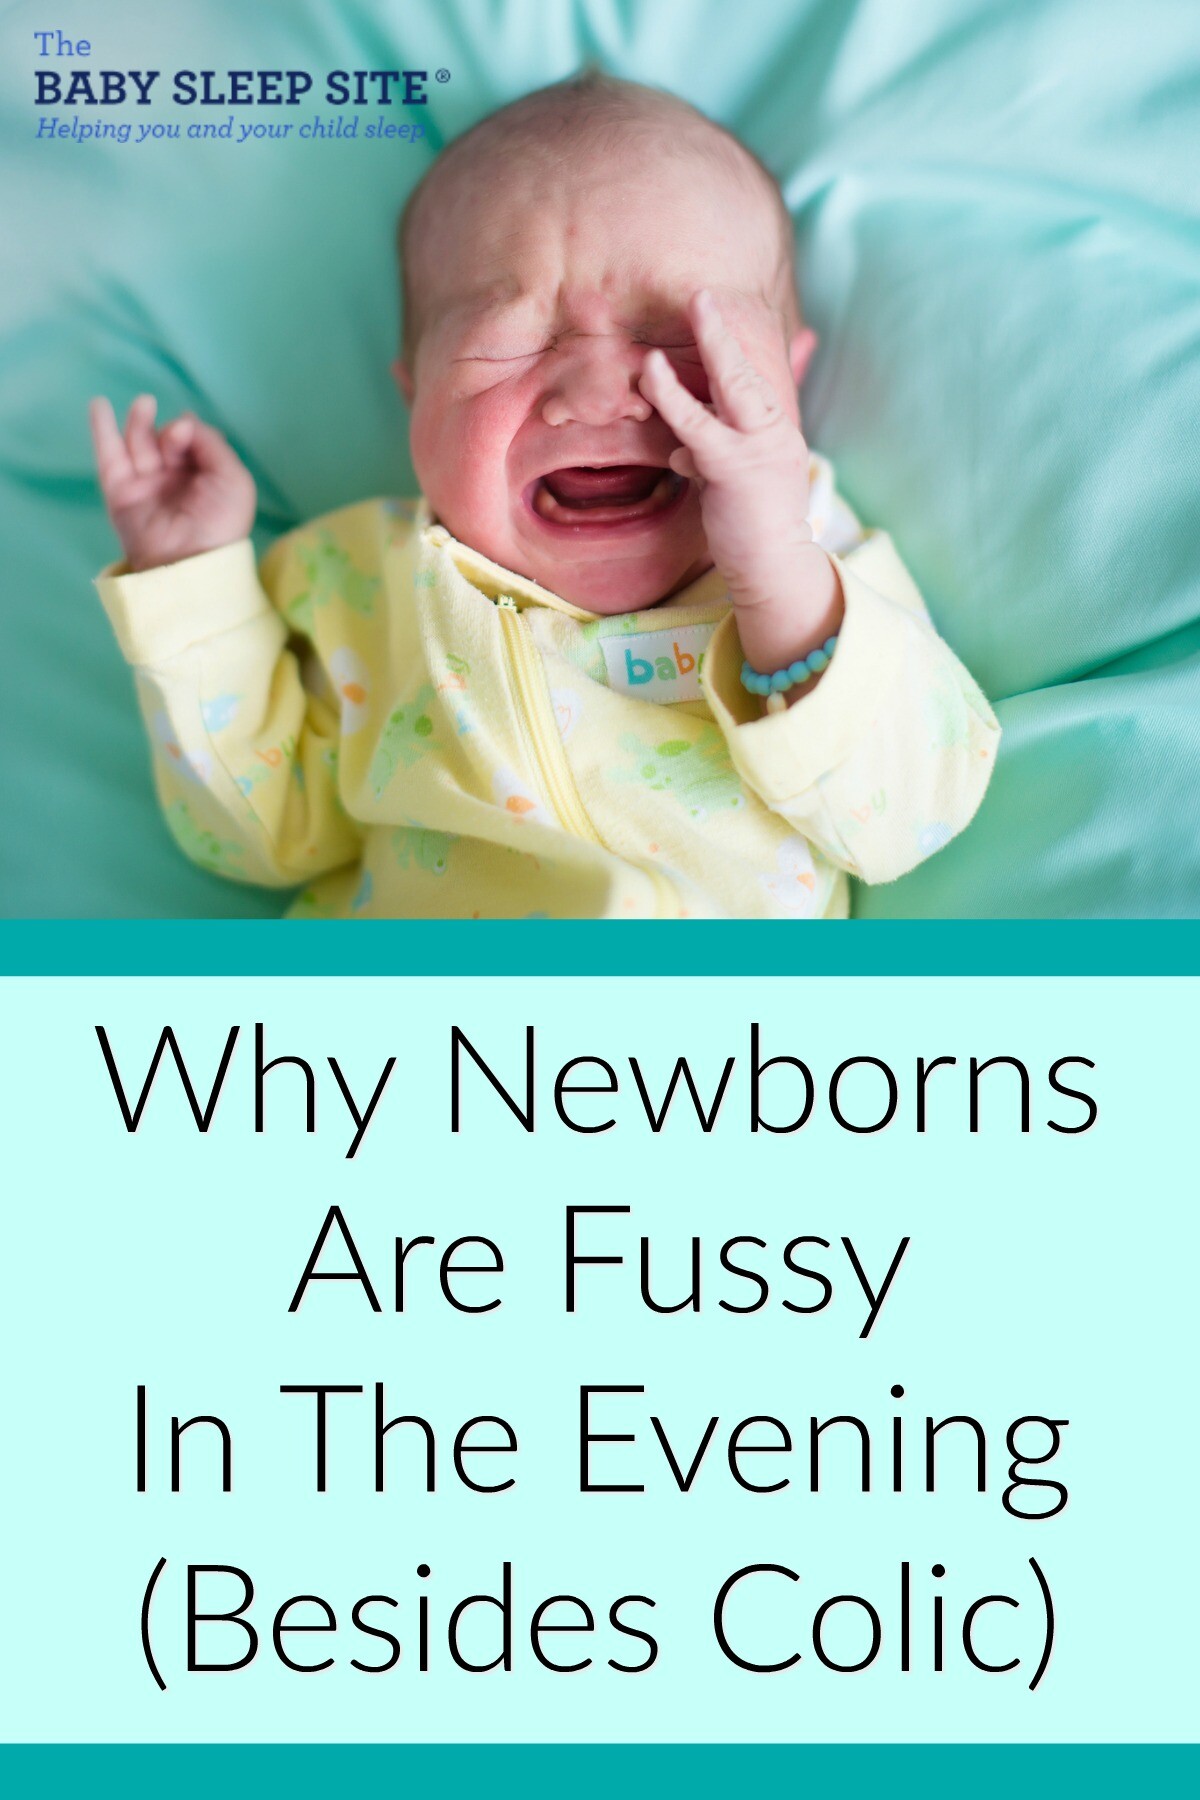 baby is only fussy at night